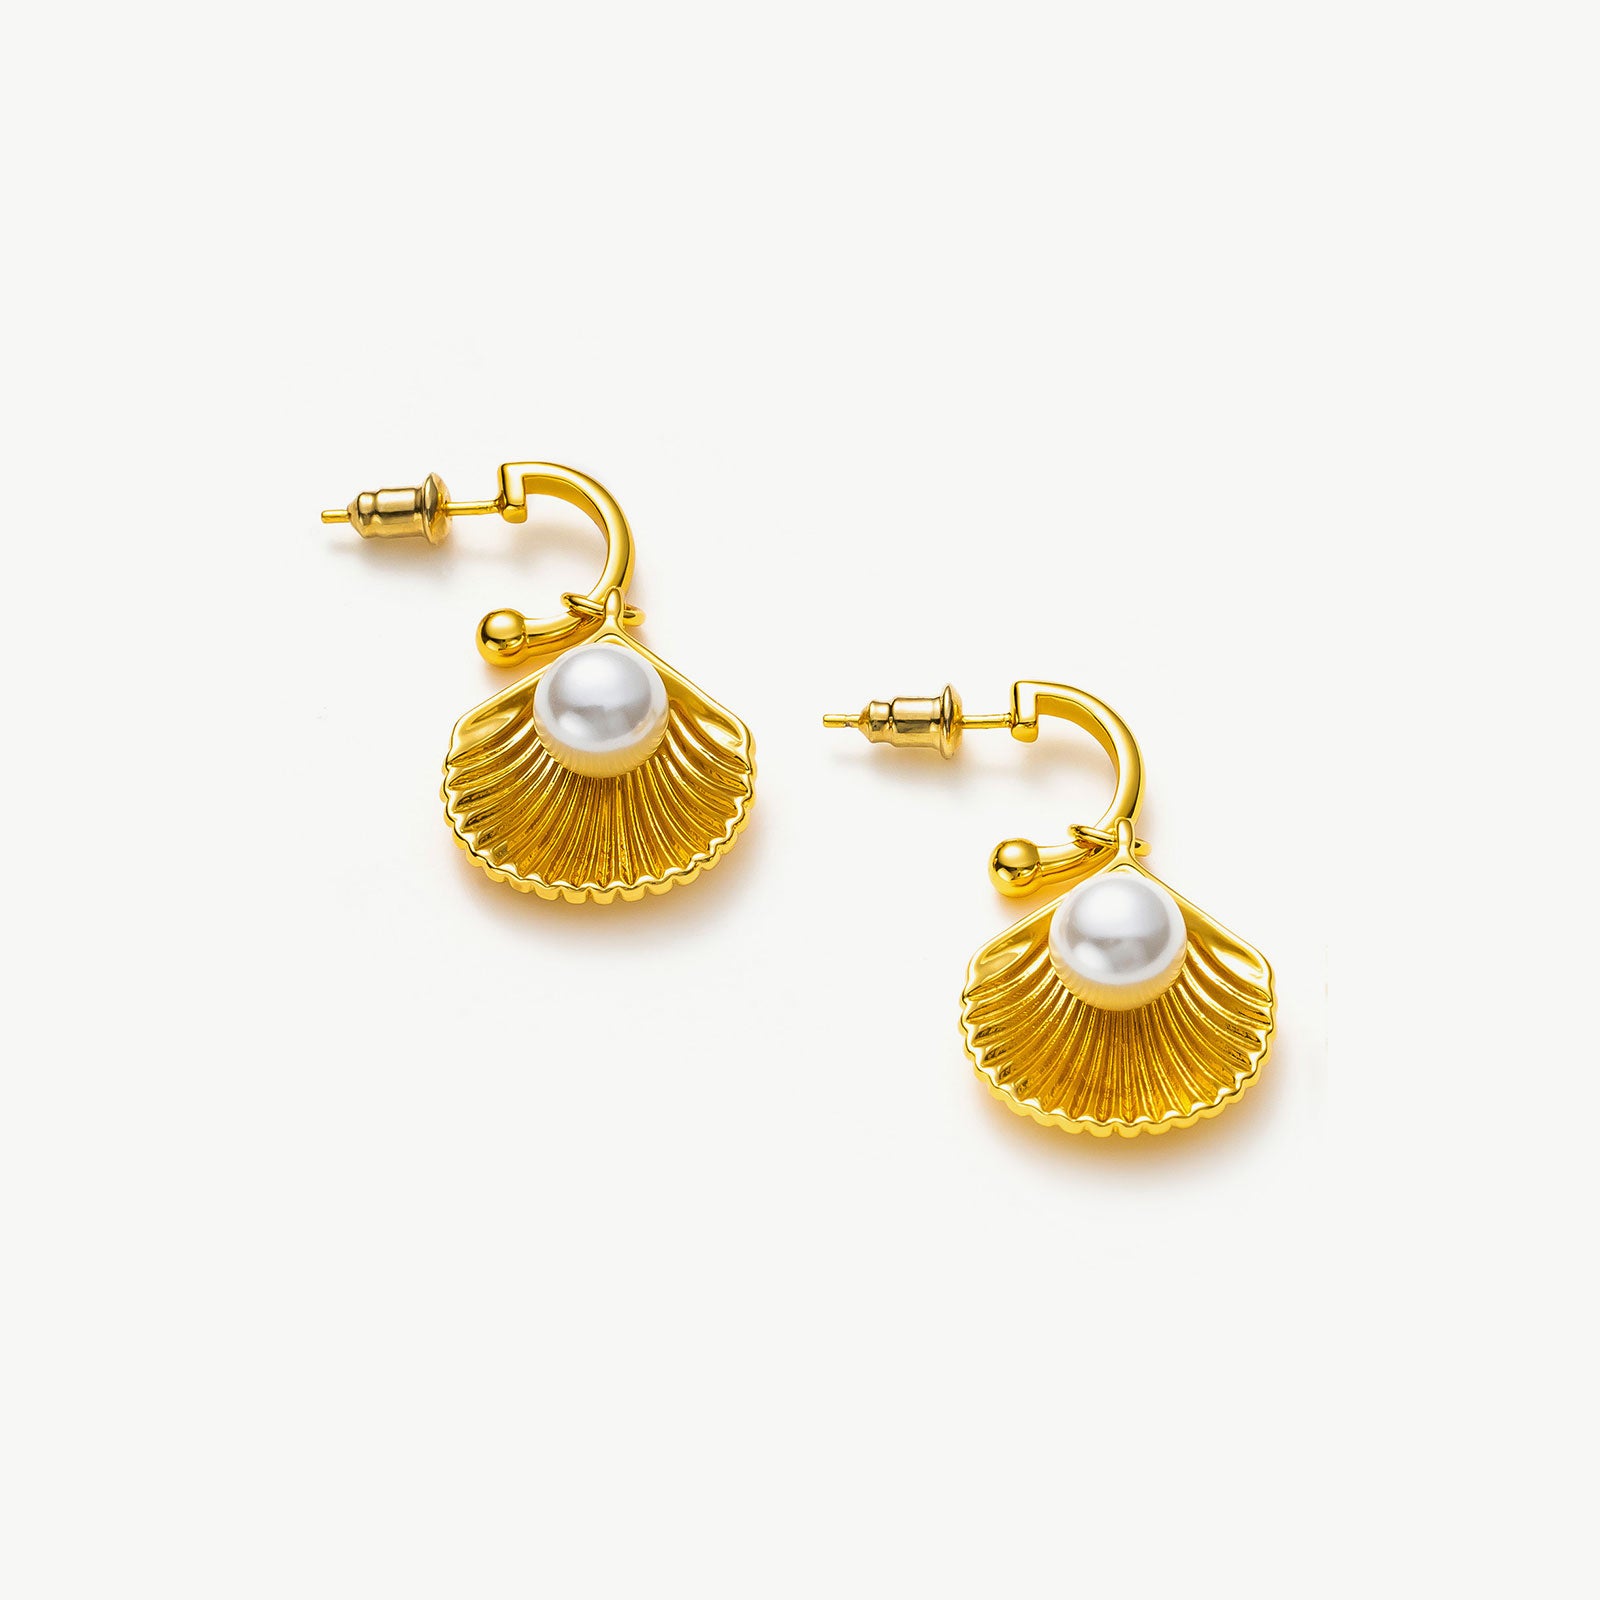 Pearl Shell Hoops, a testament to oceanic elegance, featuring lustrous pearls delicately cradled within intricately designed shell motifs for a touch of seaside refinement